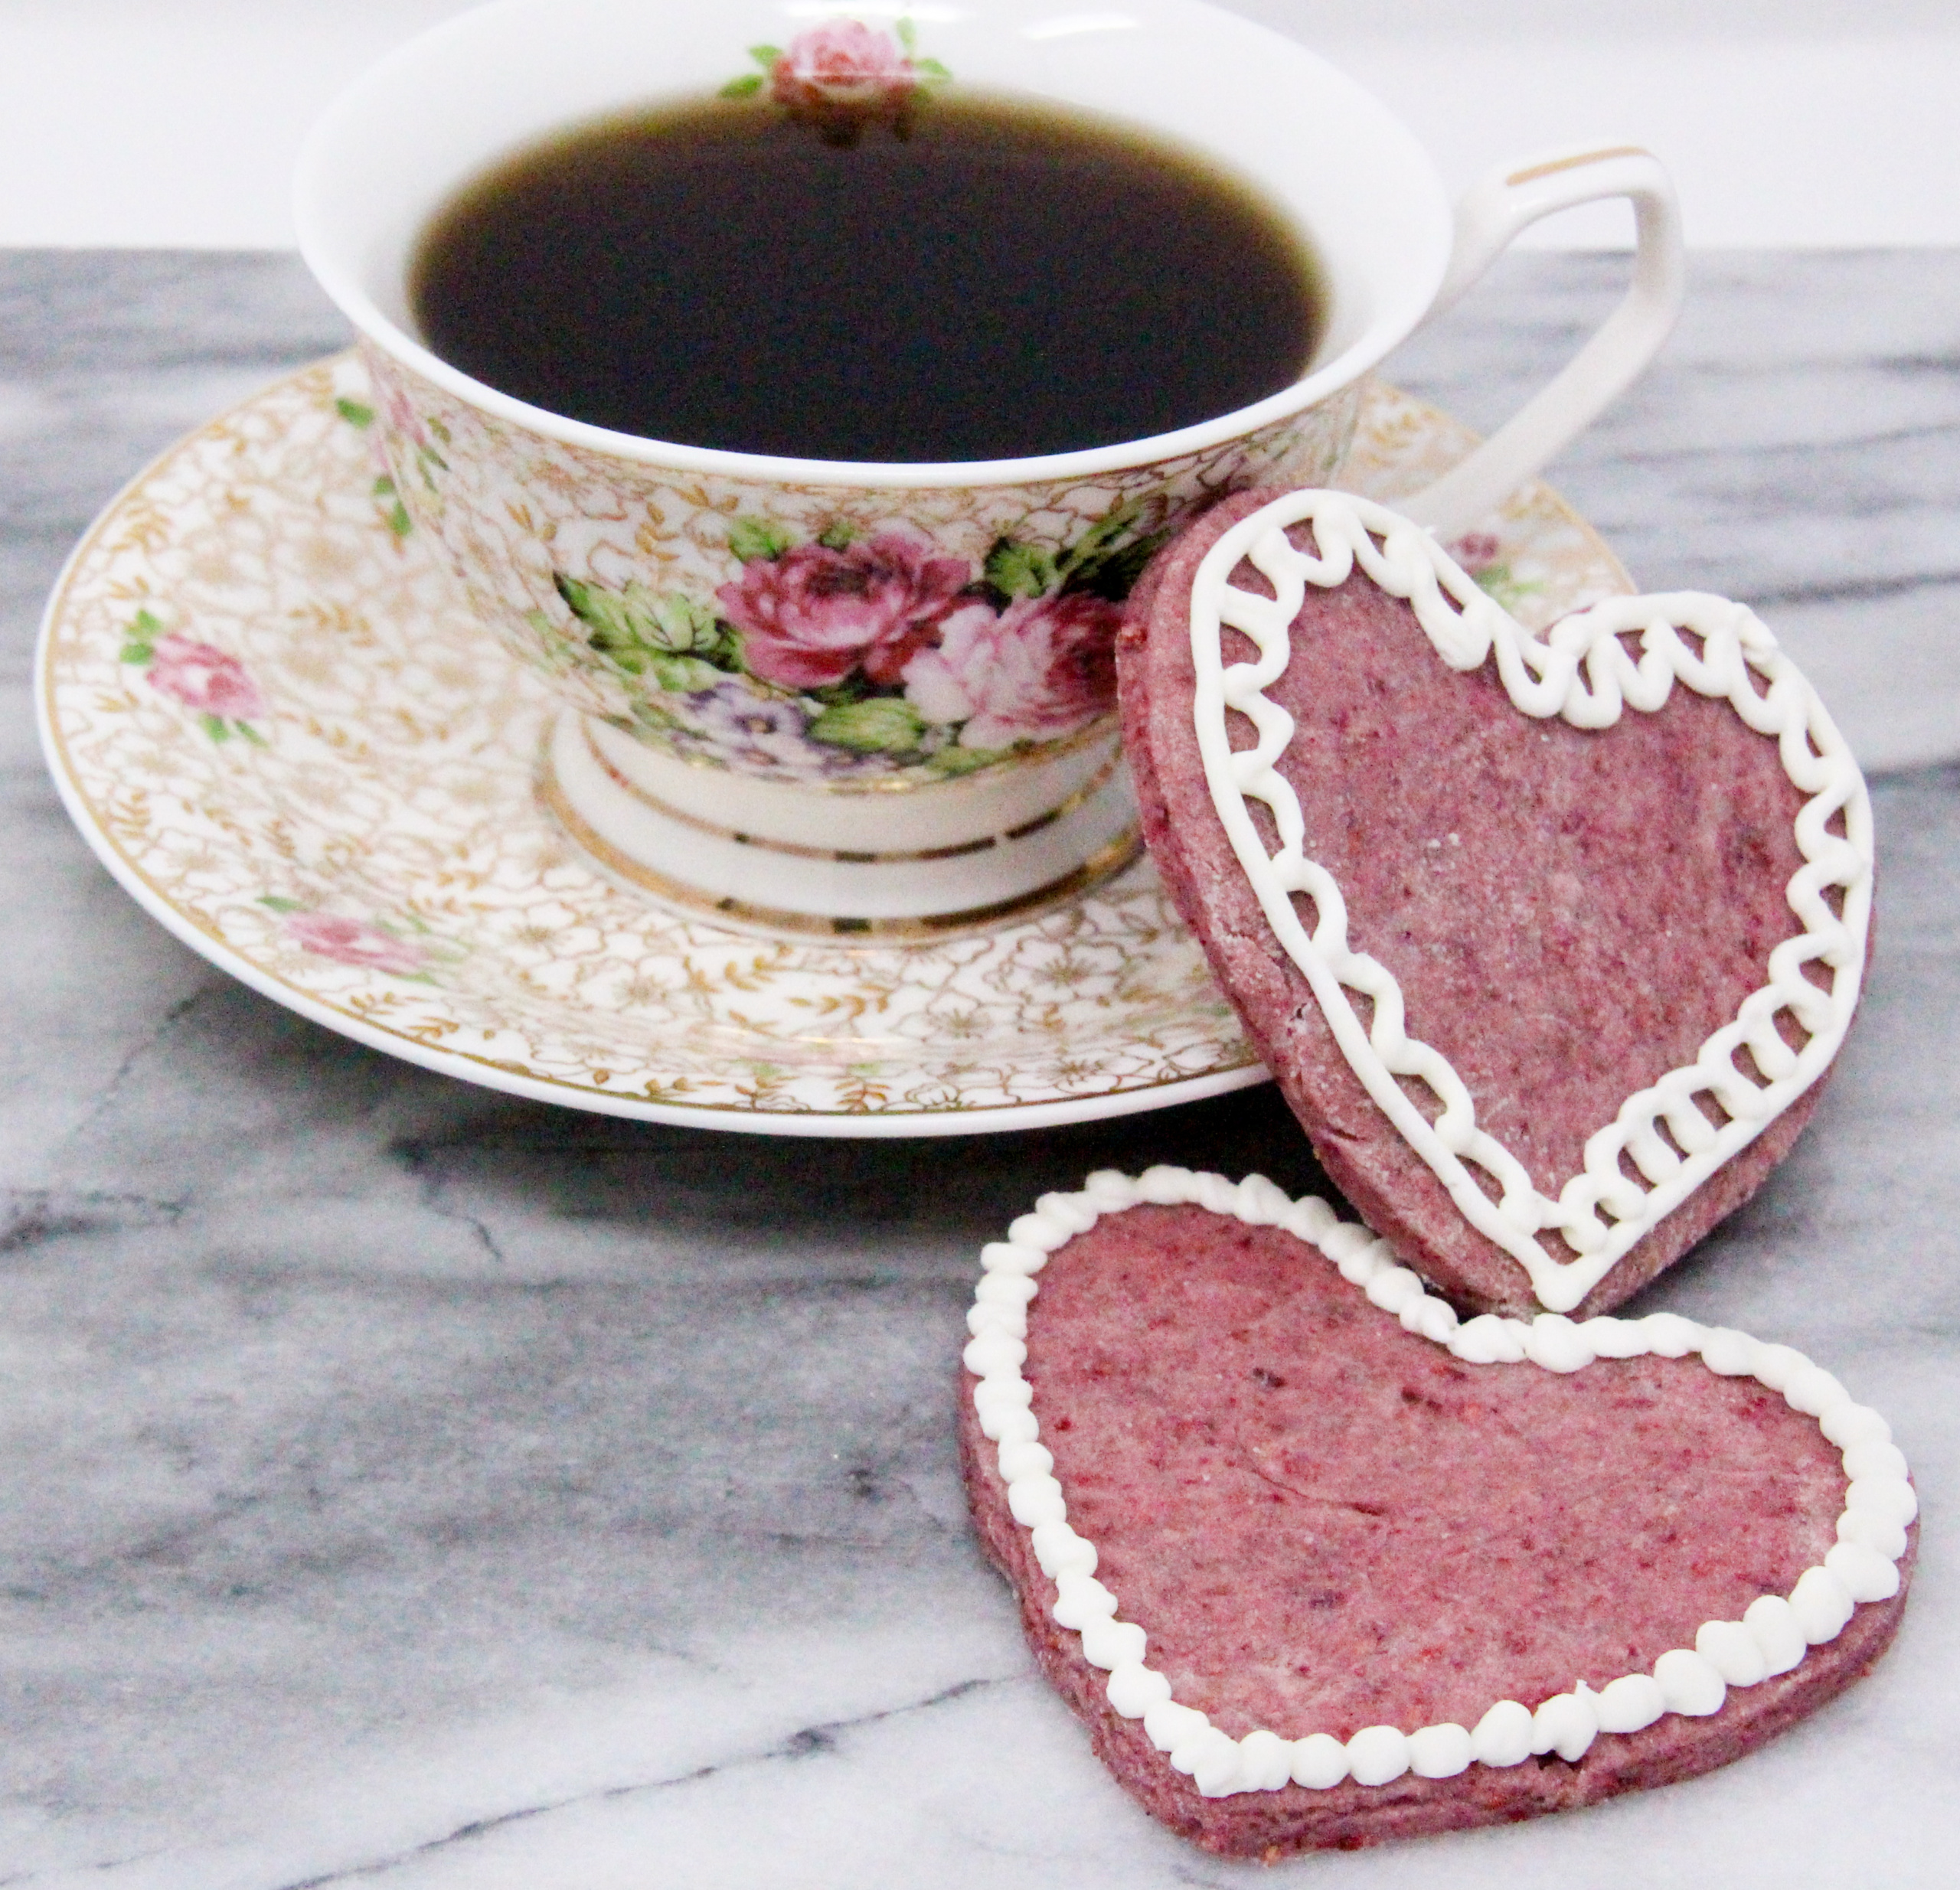 Raspberry Sugar Cookies rely on freeze-dried raspberries to provide a tart sweetness along with a pretty pink color to the cookies, without relying on food coloring. Recipe created by Cinnamon & Sugar for Catherine Bruns, author of CRIMES AND CONFECTIONS.